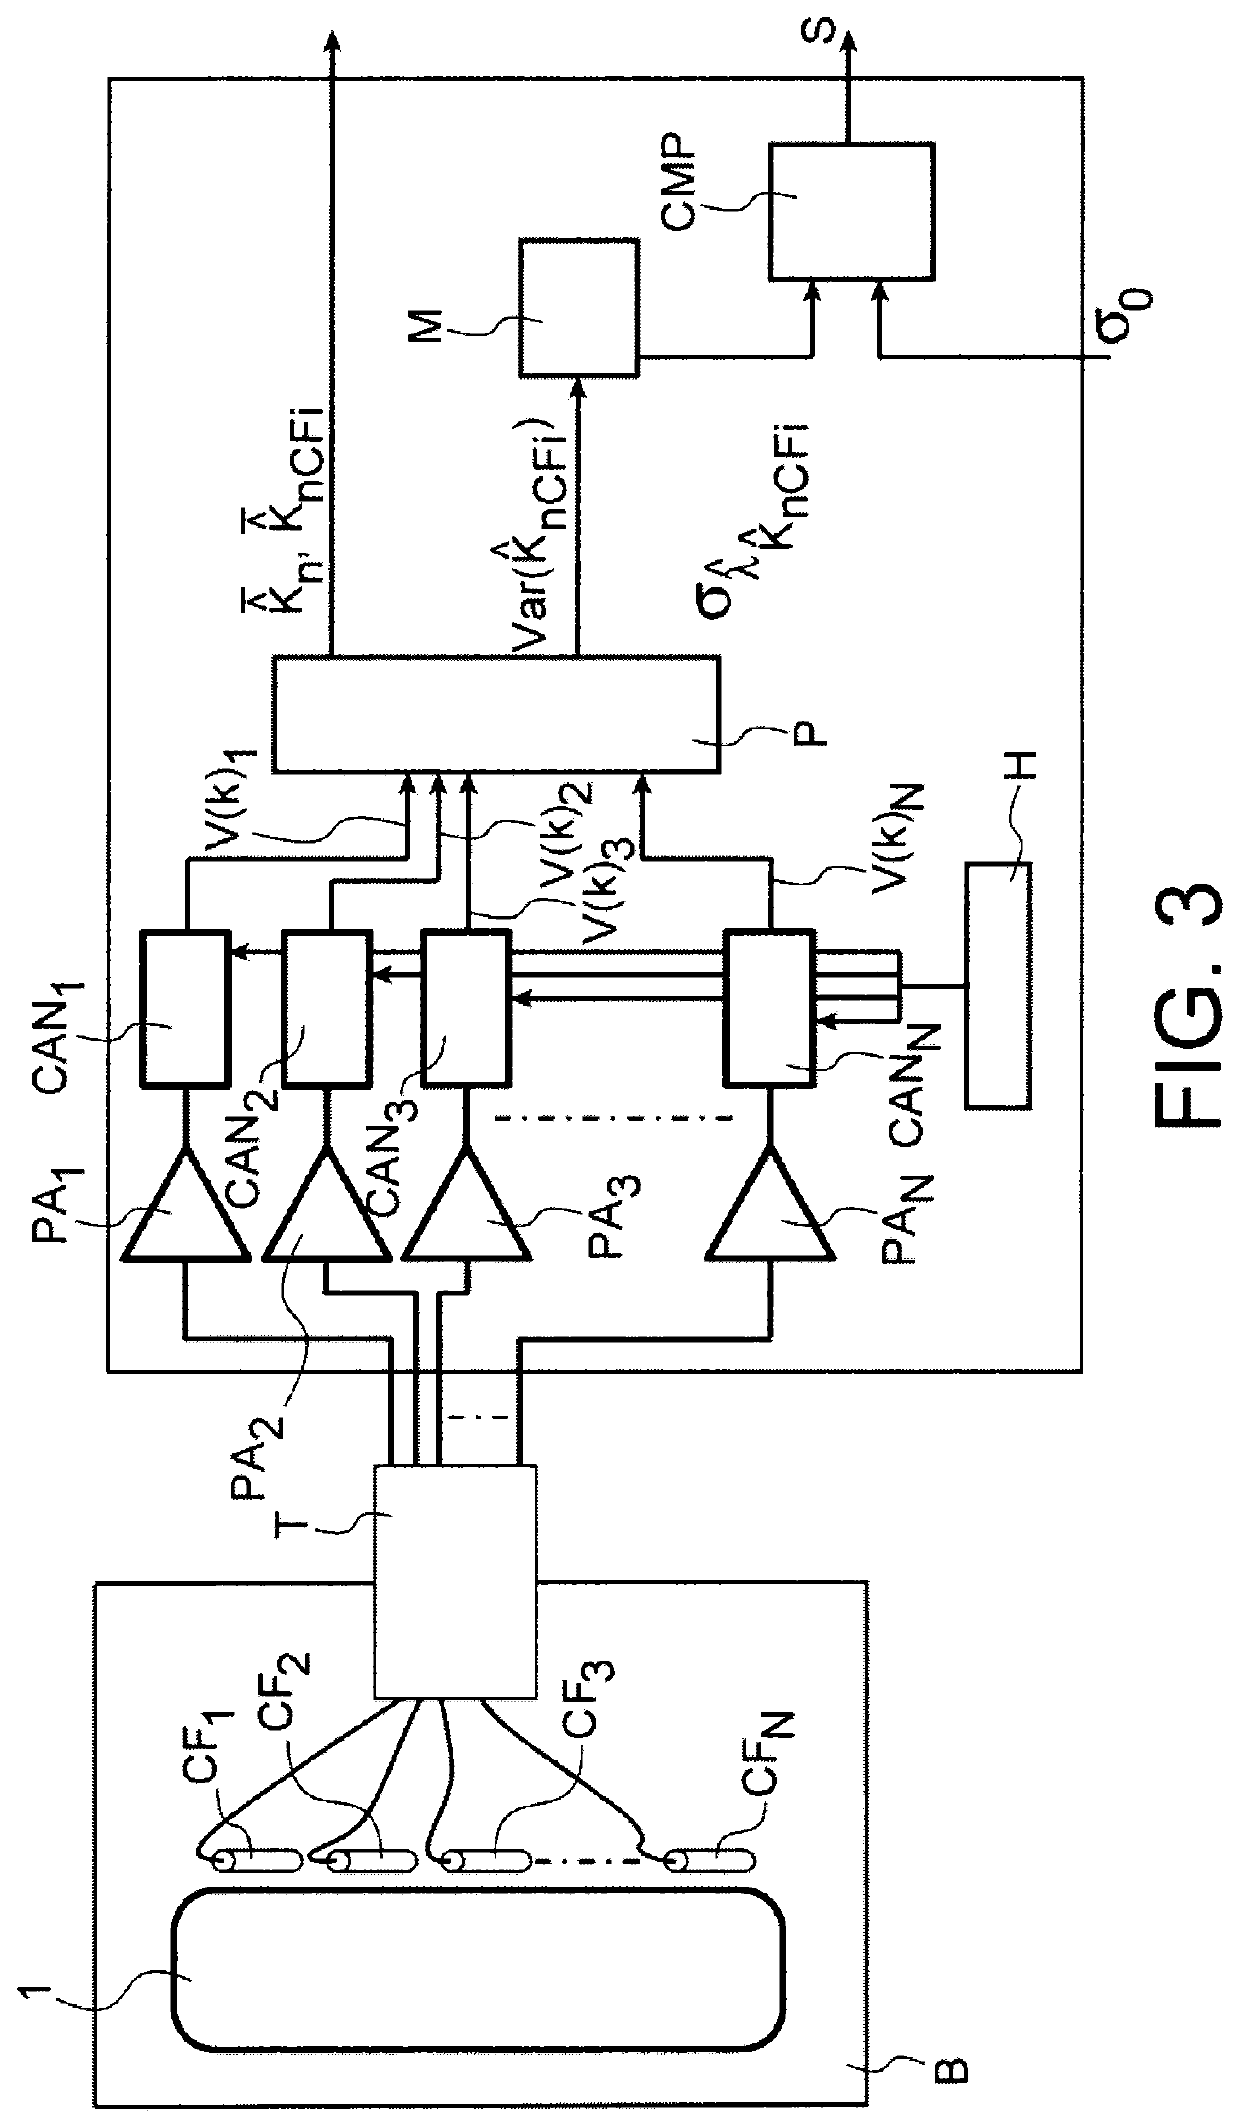 System for controlling a nuclear reactor core